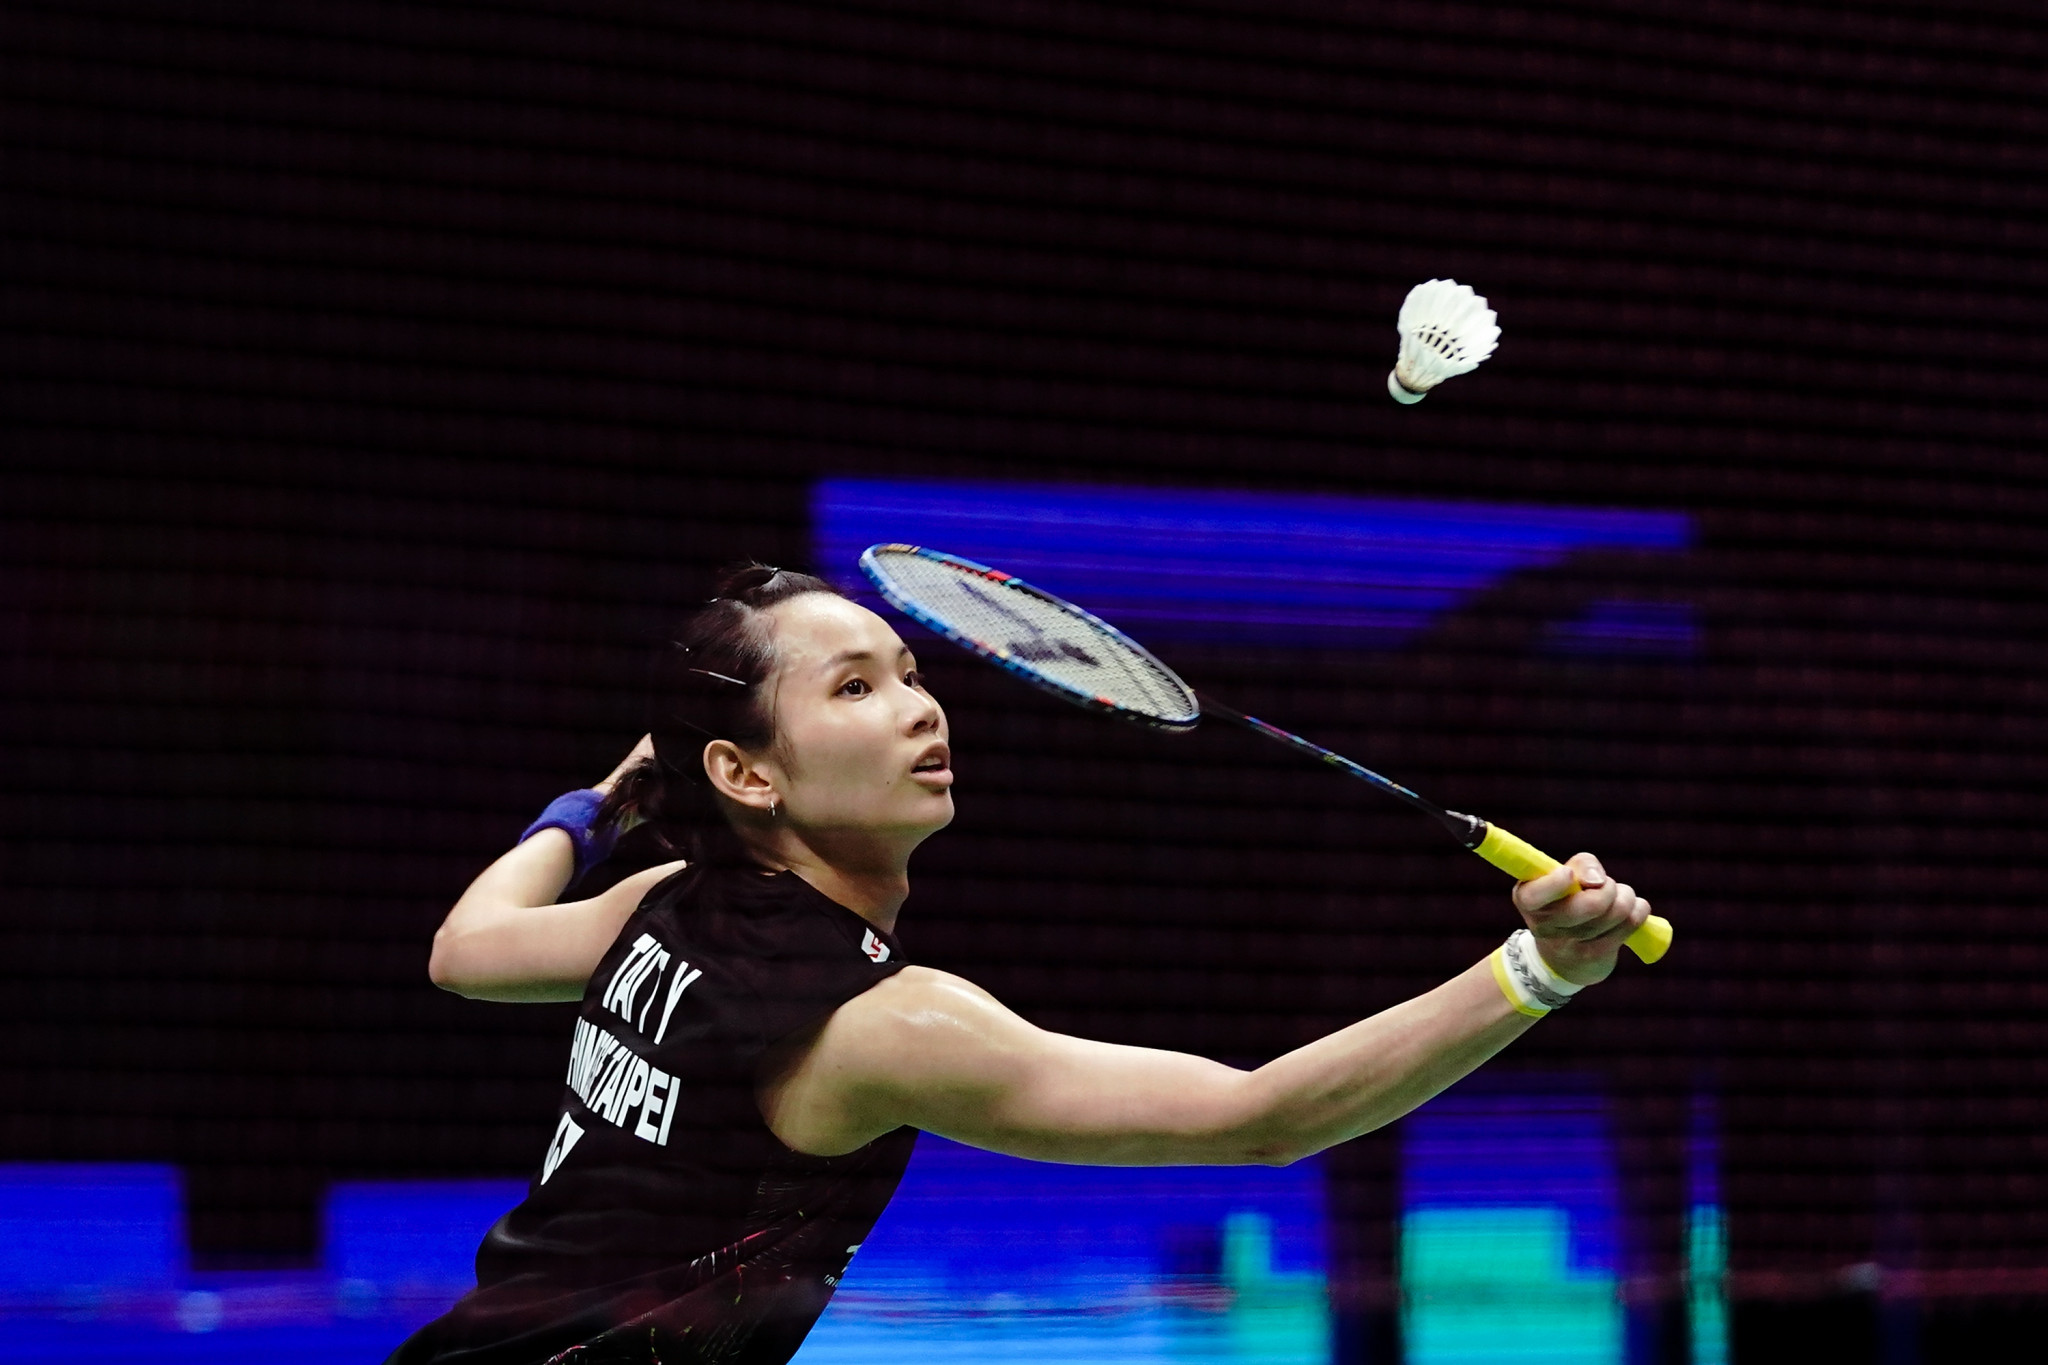 BWF hope Thailand tournaments can be "blueprint" for future events